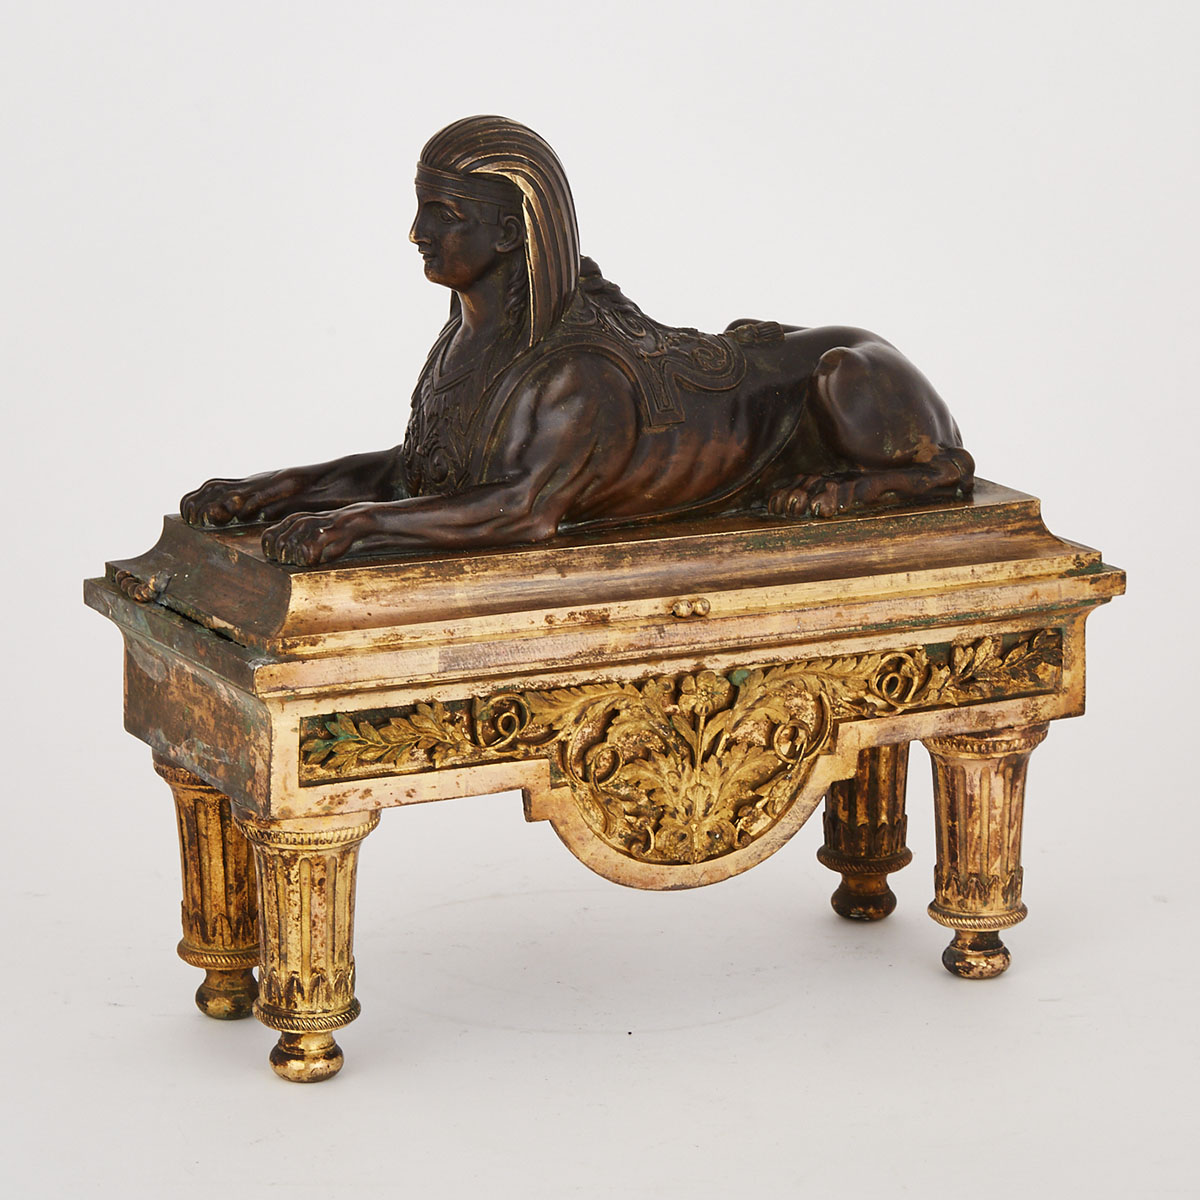 Louis XVI Gilt and Patinated Bronze Sphinx Form Chenet, late 18th century